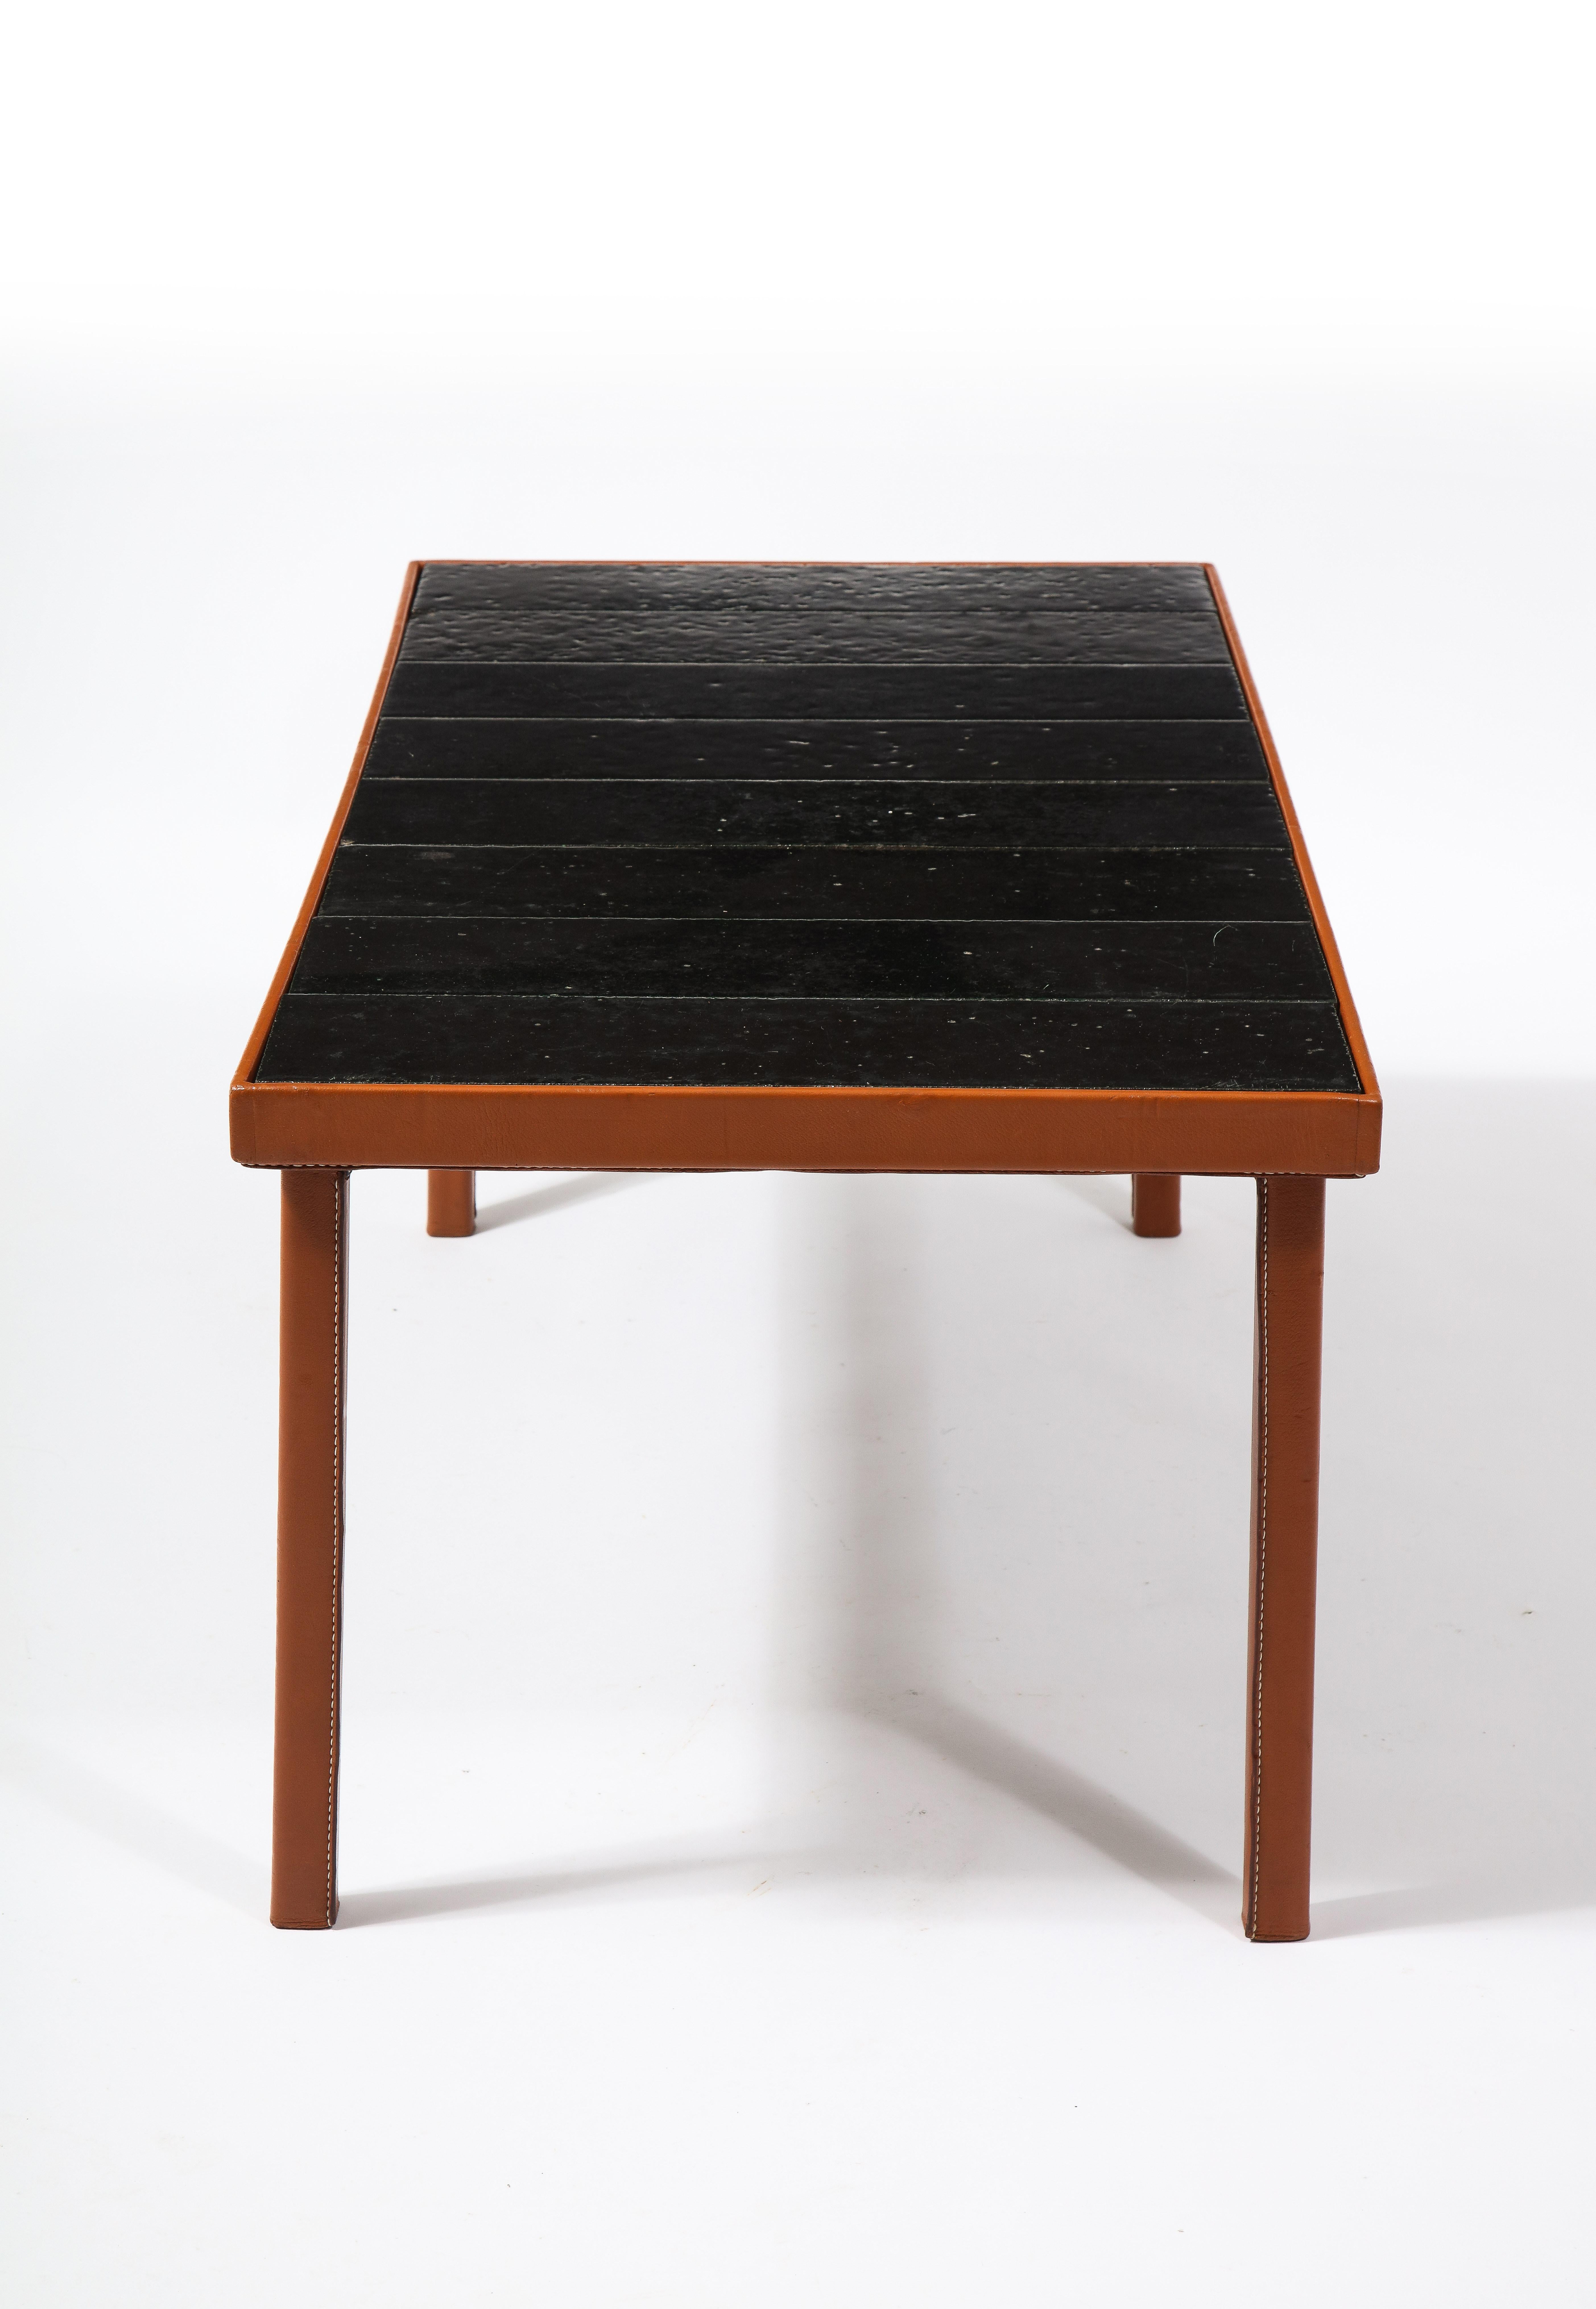 Adnet Style Leather & Dark Jouve Style Lava Stone Tiles Table, France 1950's In Good Condition For Sale In New York, NY